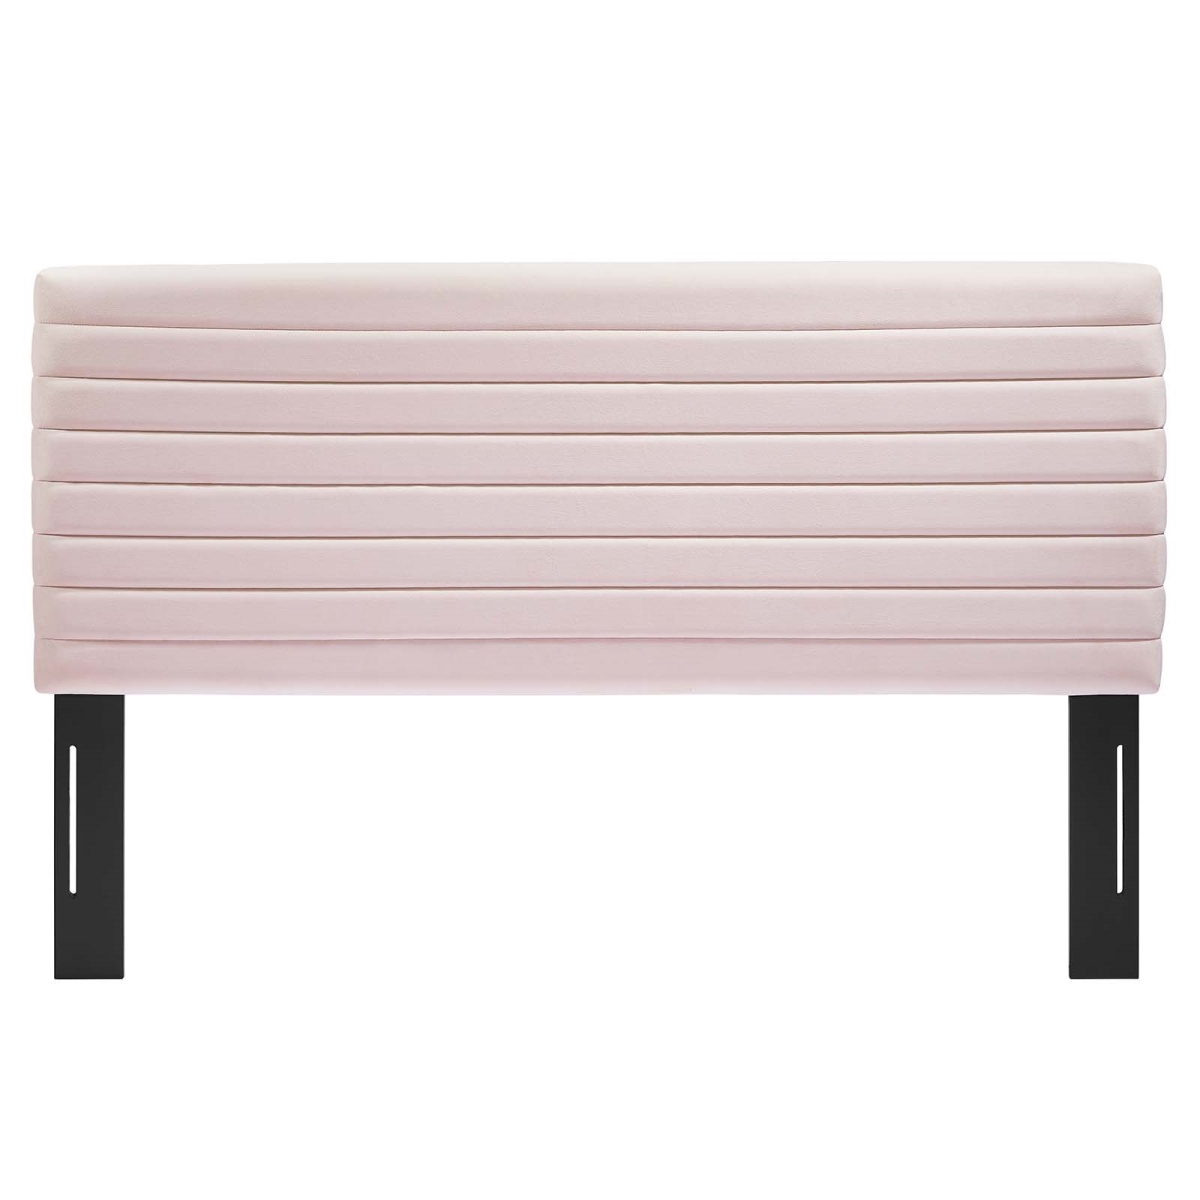 Picture of Modway Furniture MOD-7023-PNK 23 x 39.5 x 3.5 in. Tranquil Twin Size Headboard, Pink